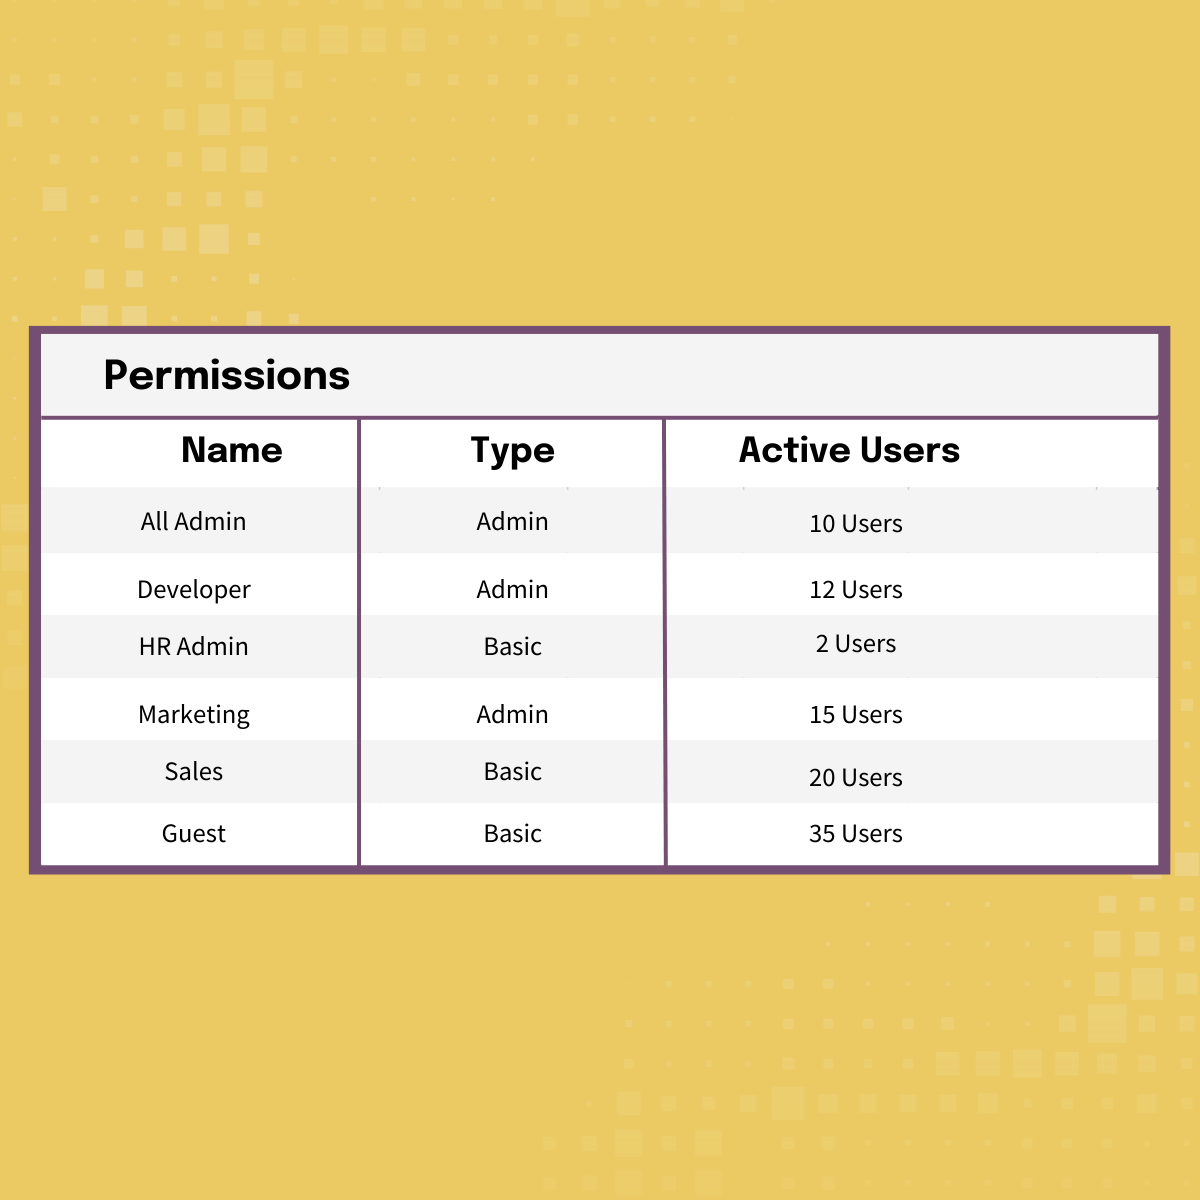 Getting Started: Managing User Access with Permissions